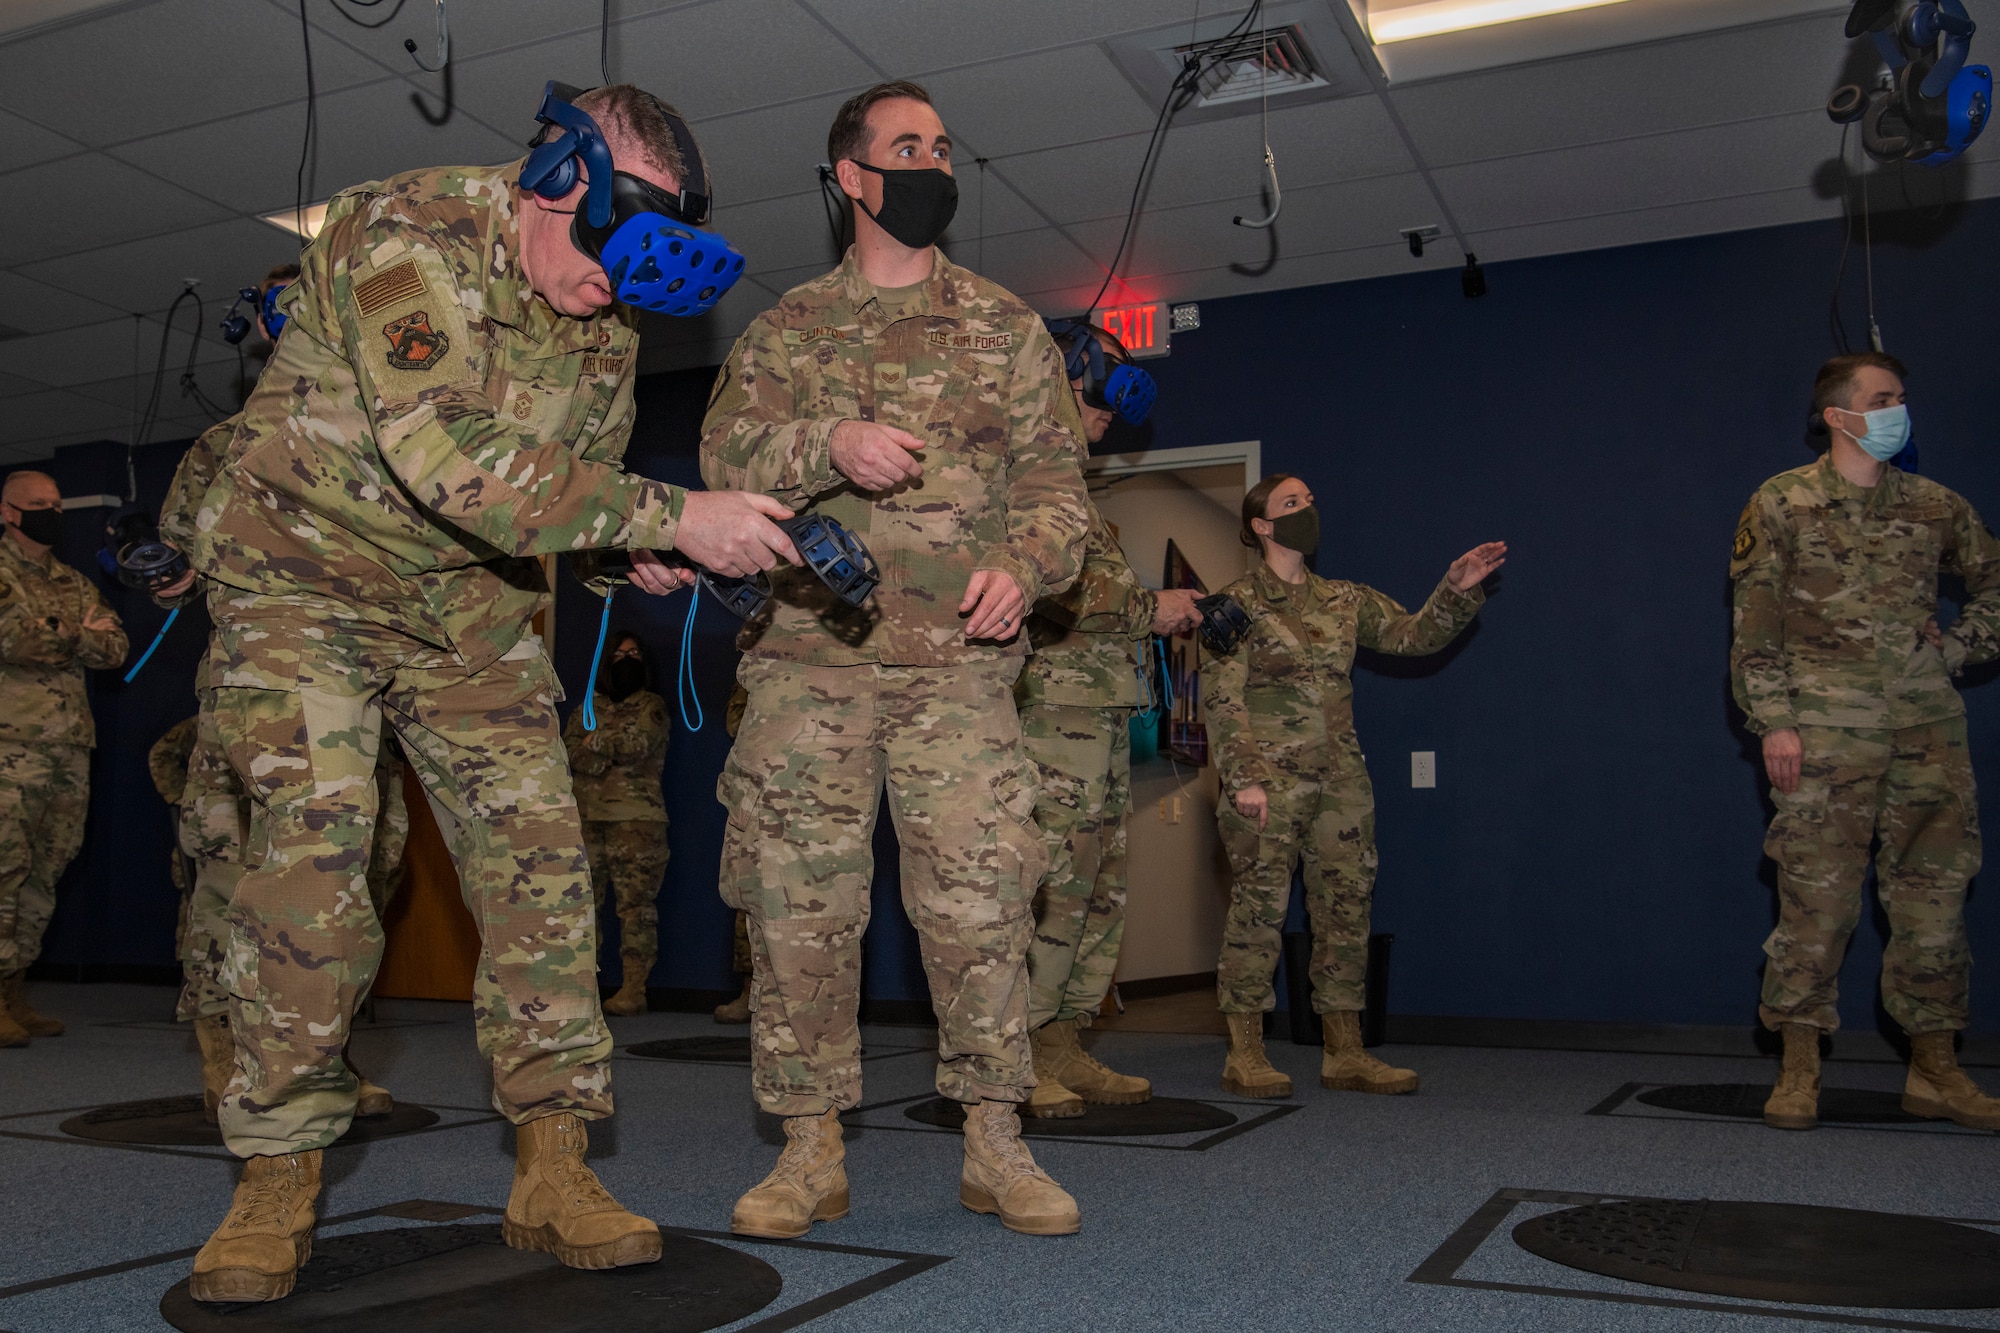 Staff Sgt. Christopher Clinton, 317th Maintenance Group noncommissioned officer in charge of the virtual reality lab, aids Chief Master Sgt. Chad Bickley, 18th Air Force command chief, with virtual reality controls at Dyess Air Force Base, Texas, Mar. 3, 2021.